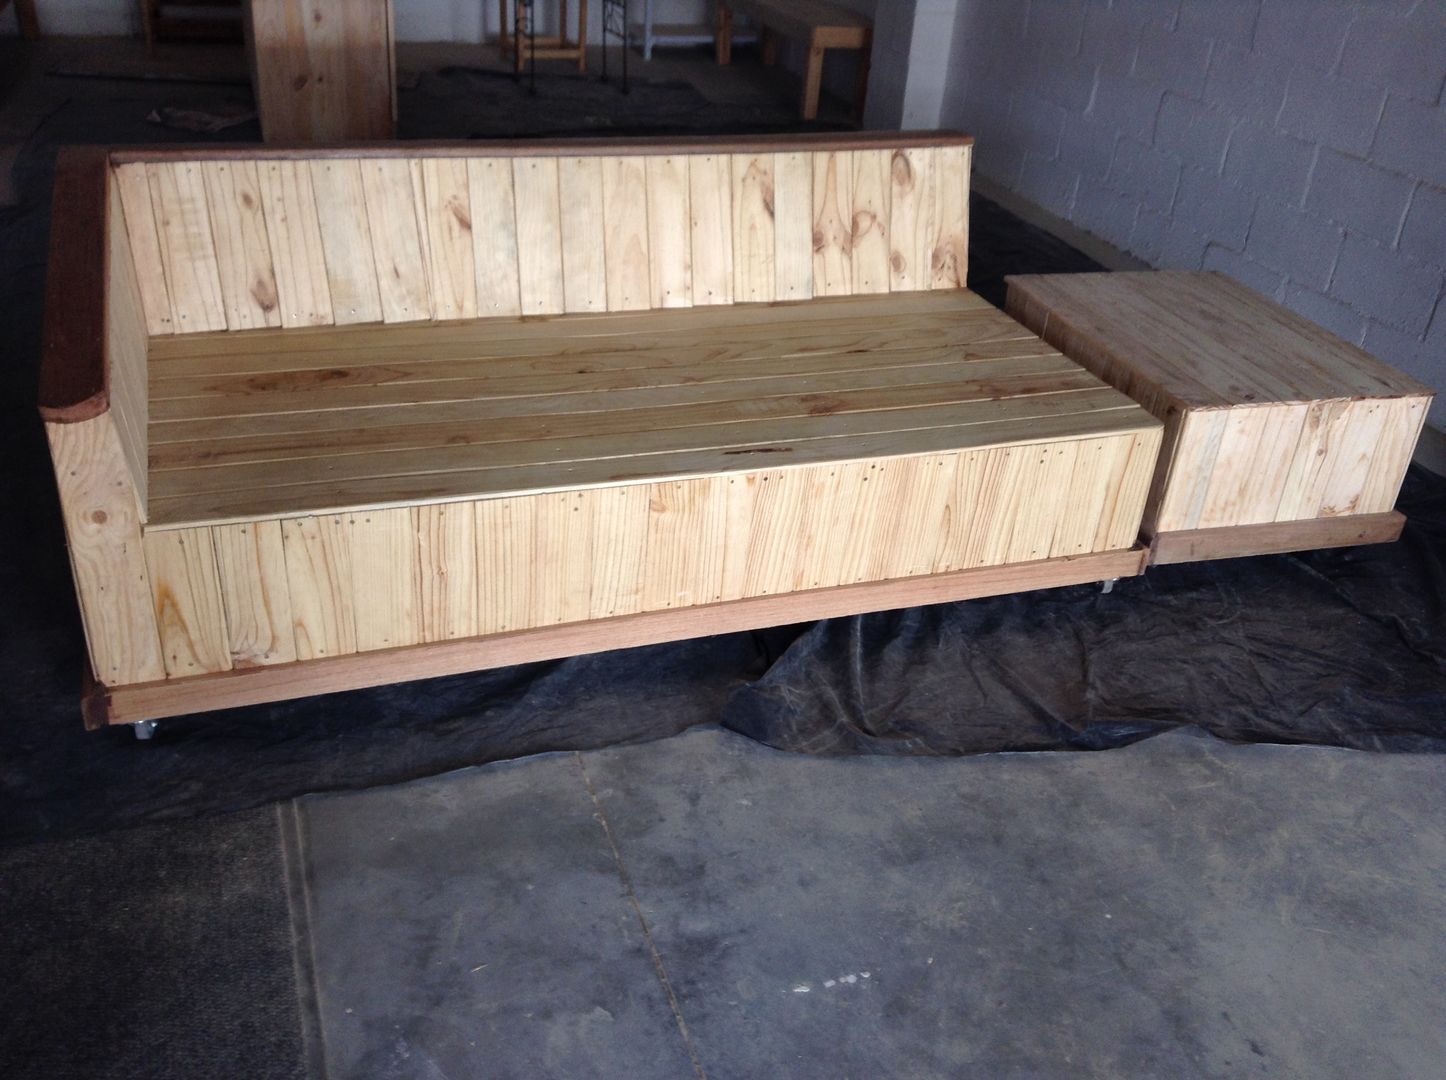 Four Seater Daybed Pallet Furniture Cape Town Terrace Furniture